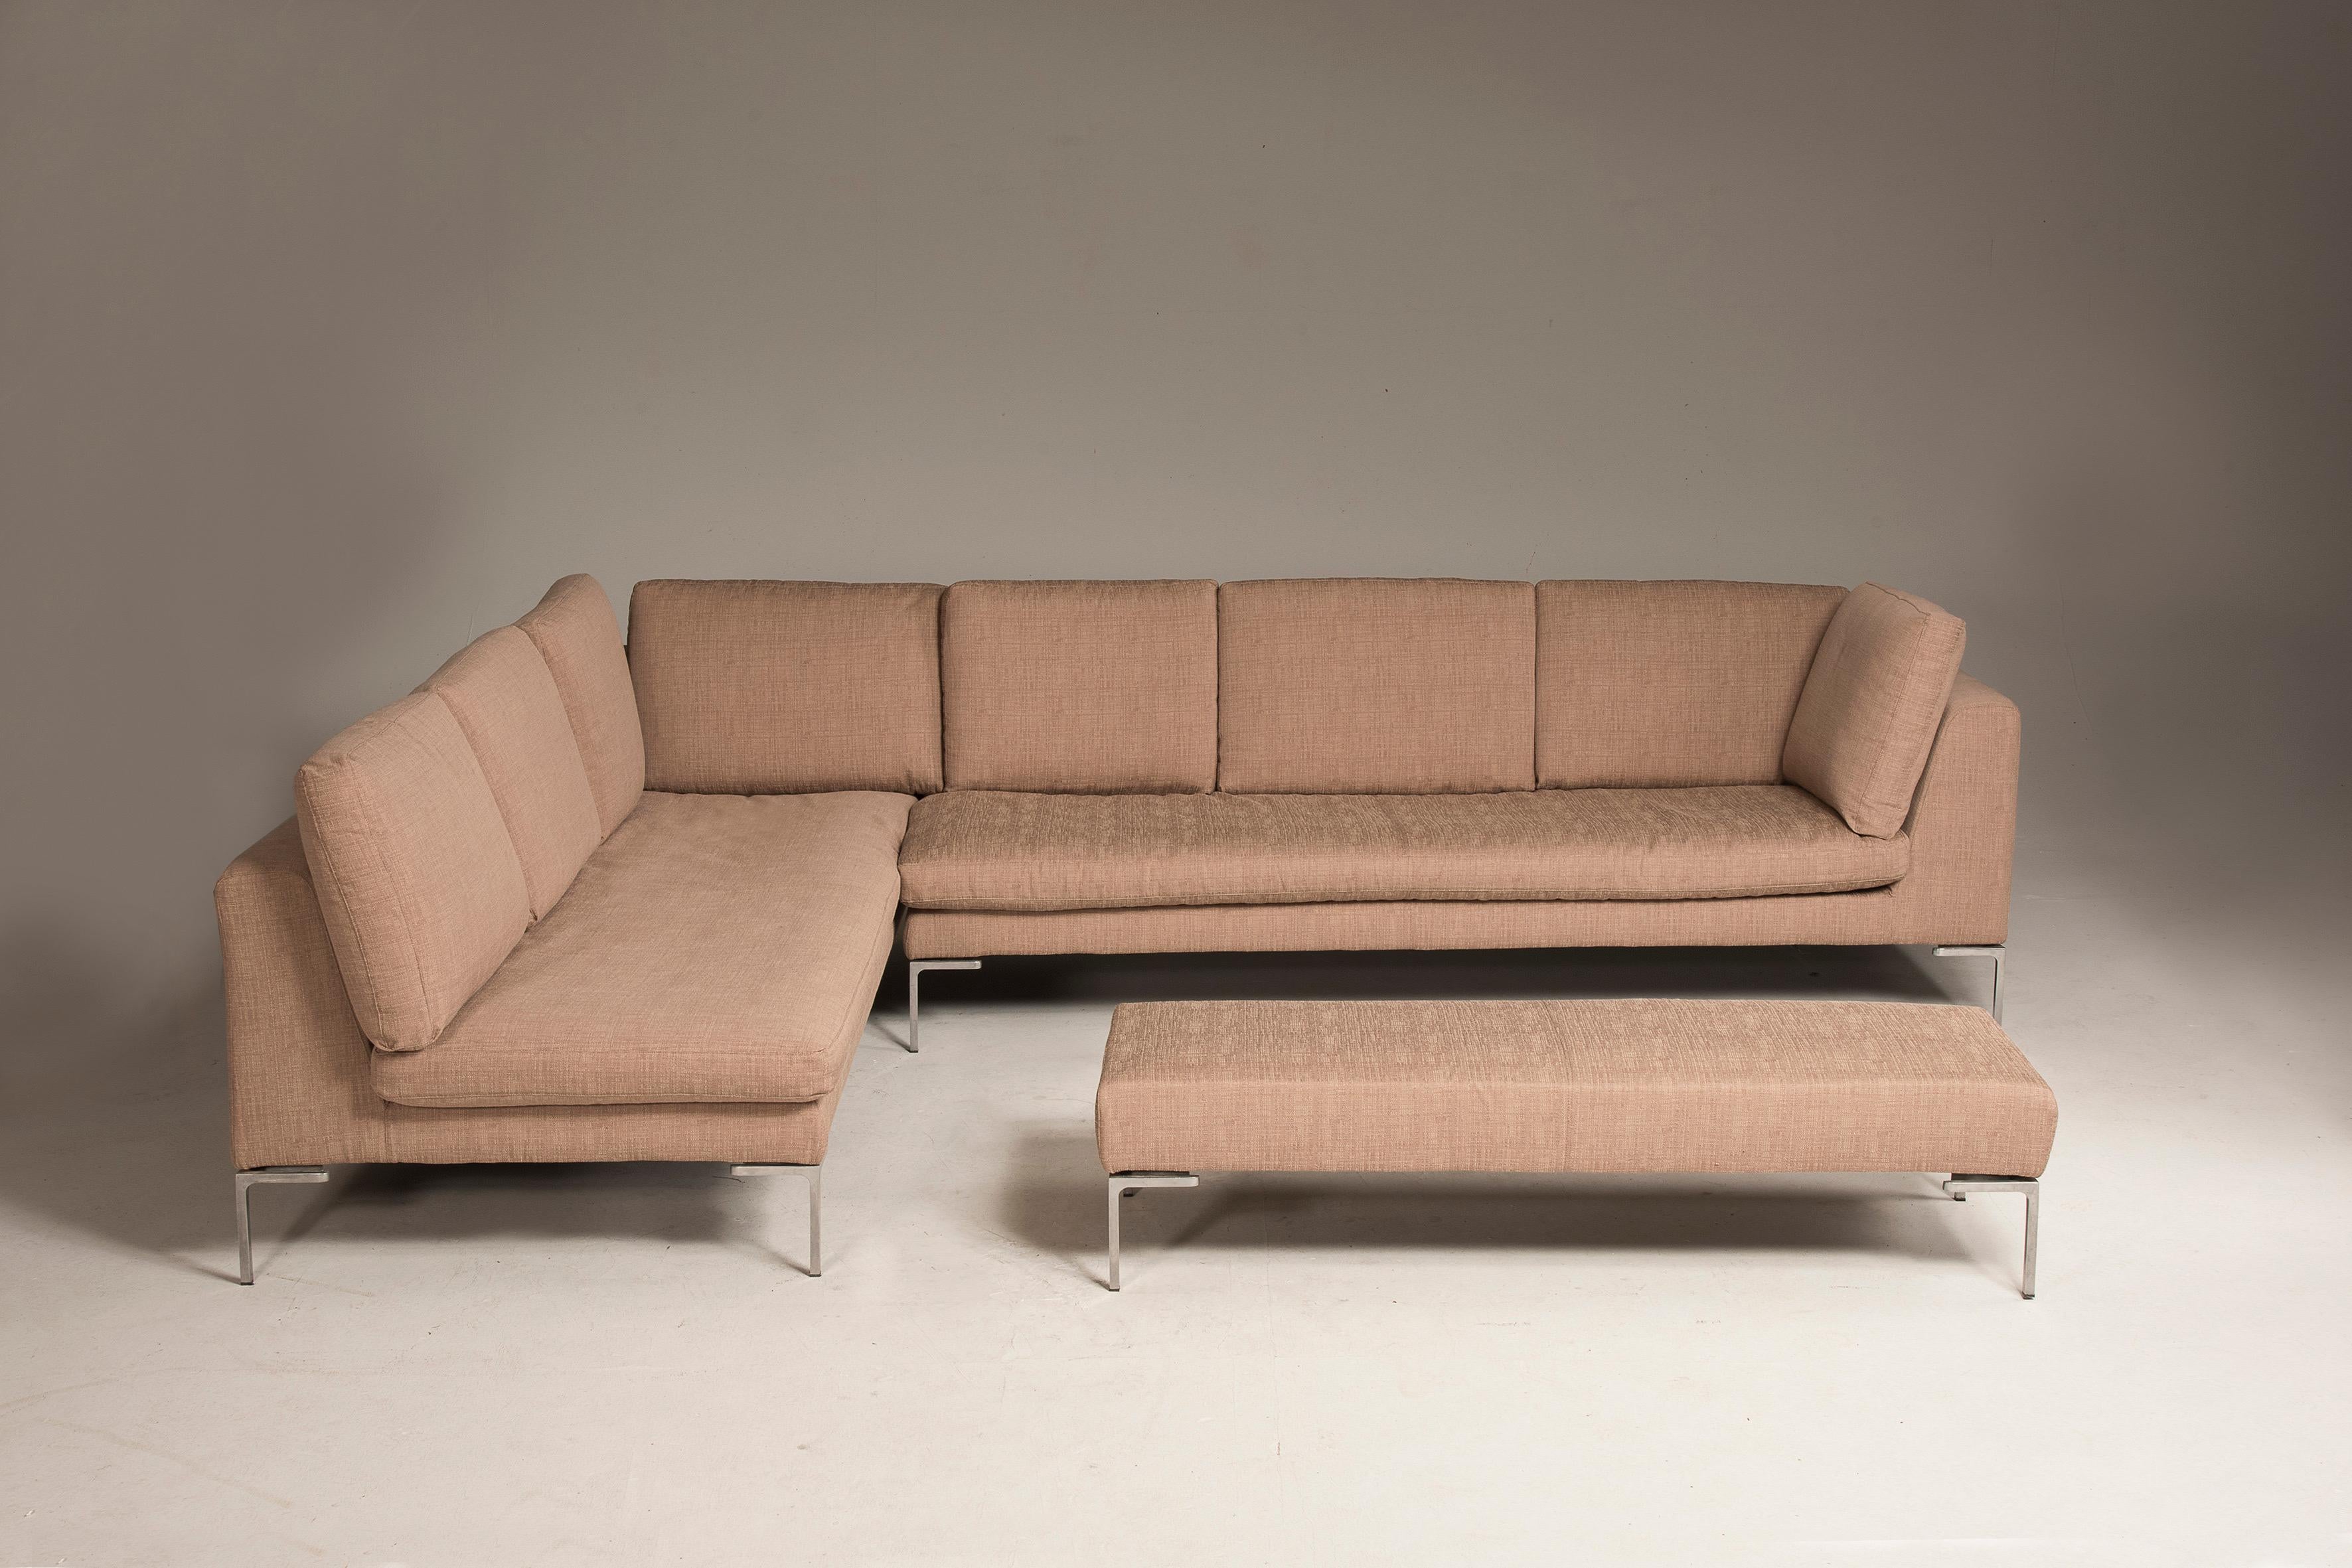 Modern Charles Model by Antonio Citterio for B&B Italia Beige Color Sofà and Bench Set